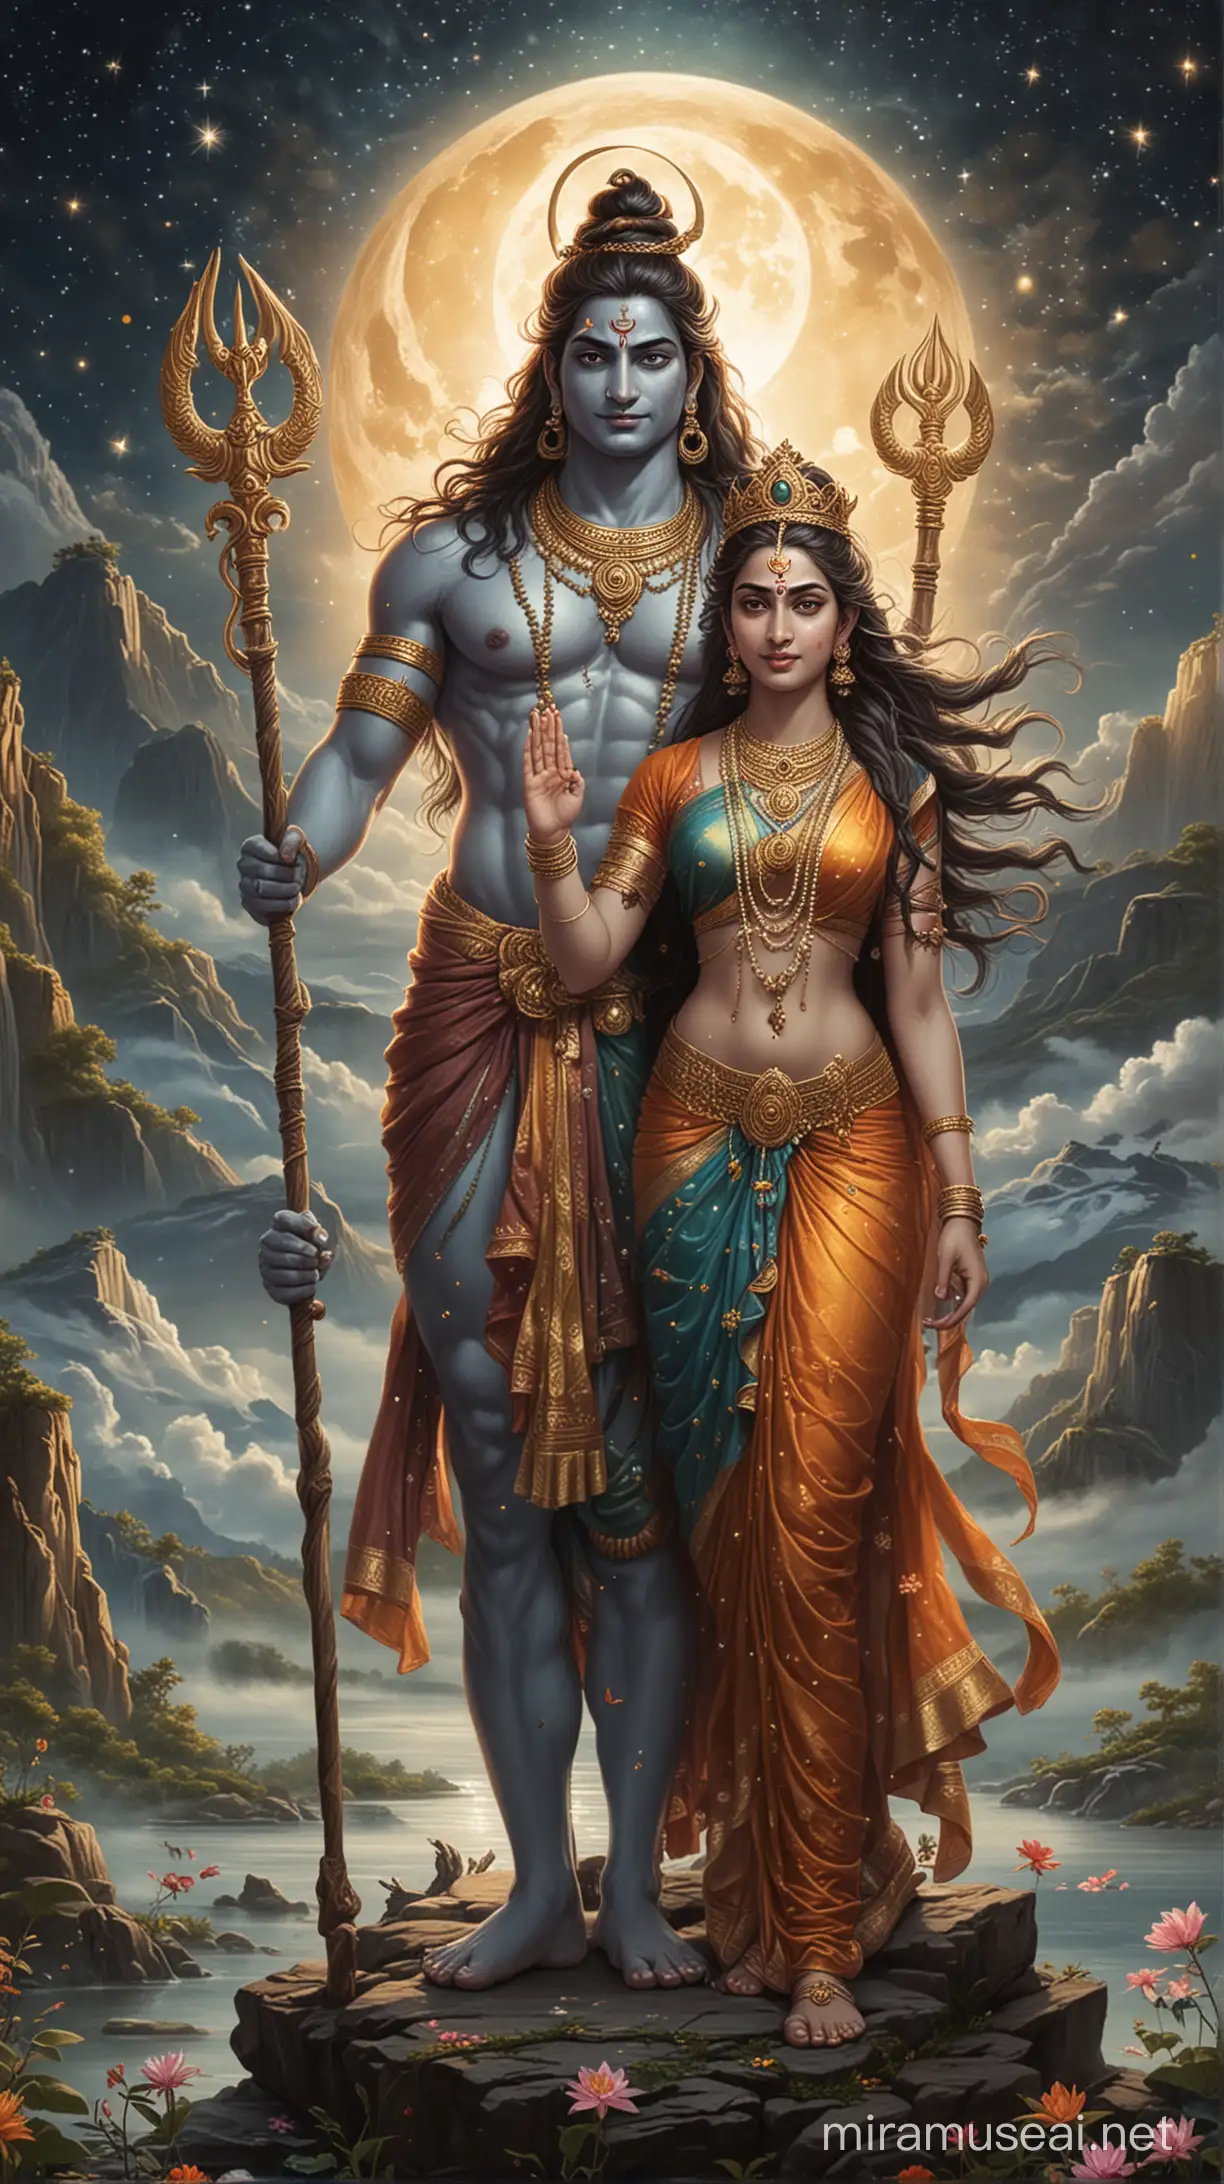 A high-quality, mesmerizing illustration of Lord Shiva and Goddess Parvati standing together, set against a serene, celestial backdrop. Shiva is depicted in his classic form, adorned with a third eye, serpent garlands, and a crescent moon on his head. He holds a trident in one hand and a damru in the other, exuding an aura of peace and power. Parvati, by his side, is beautifully adorned with an assortment of jewelry and a crown, emanating grace and elegance. Their surroundings are an otherworldly landscape, with floating lotus flowers, celestial bodies, and a gentle halo of light.